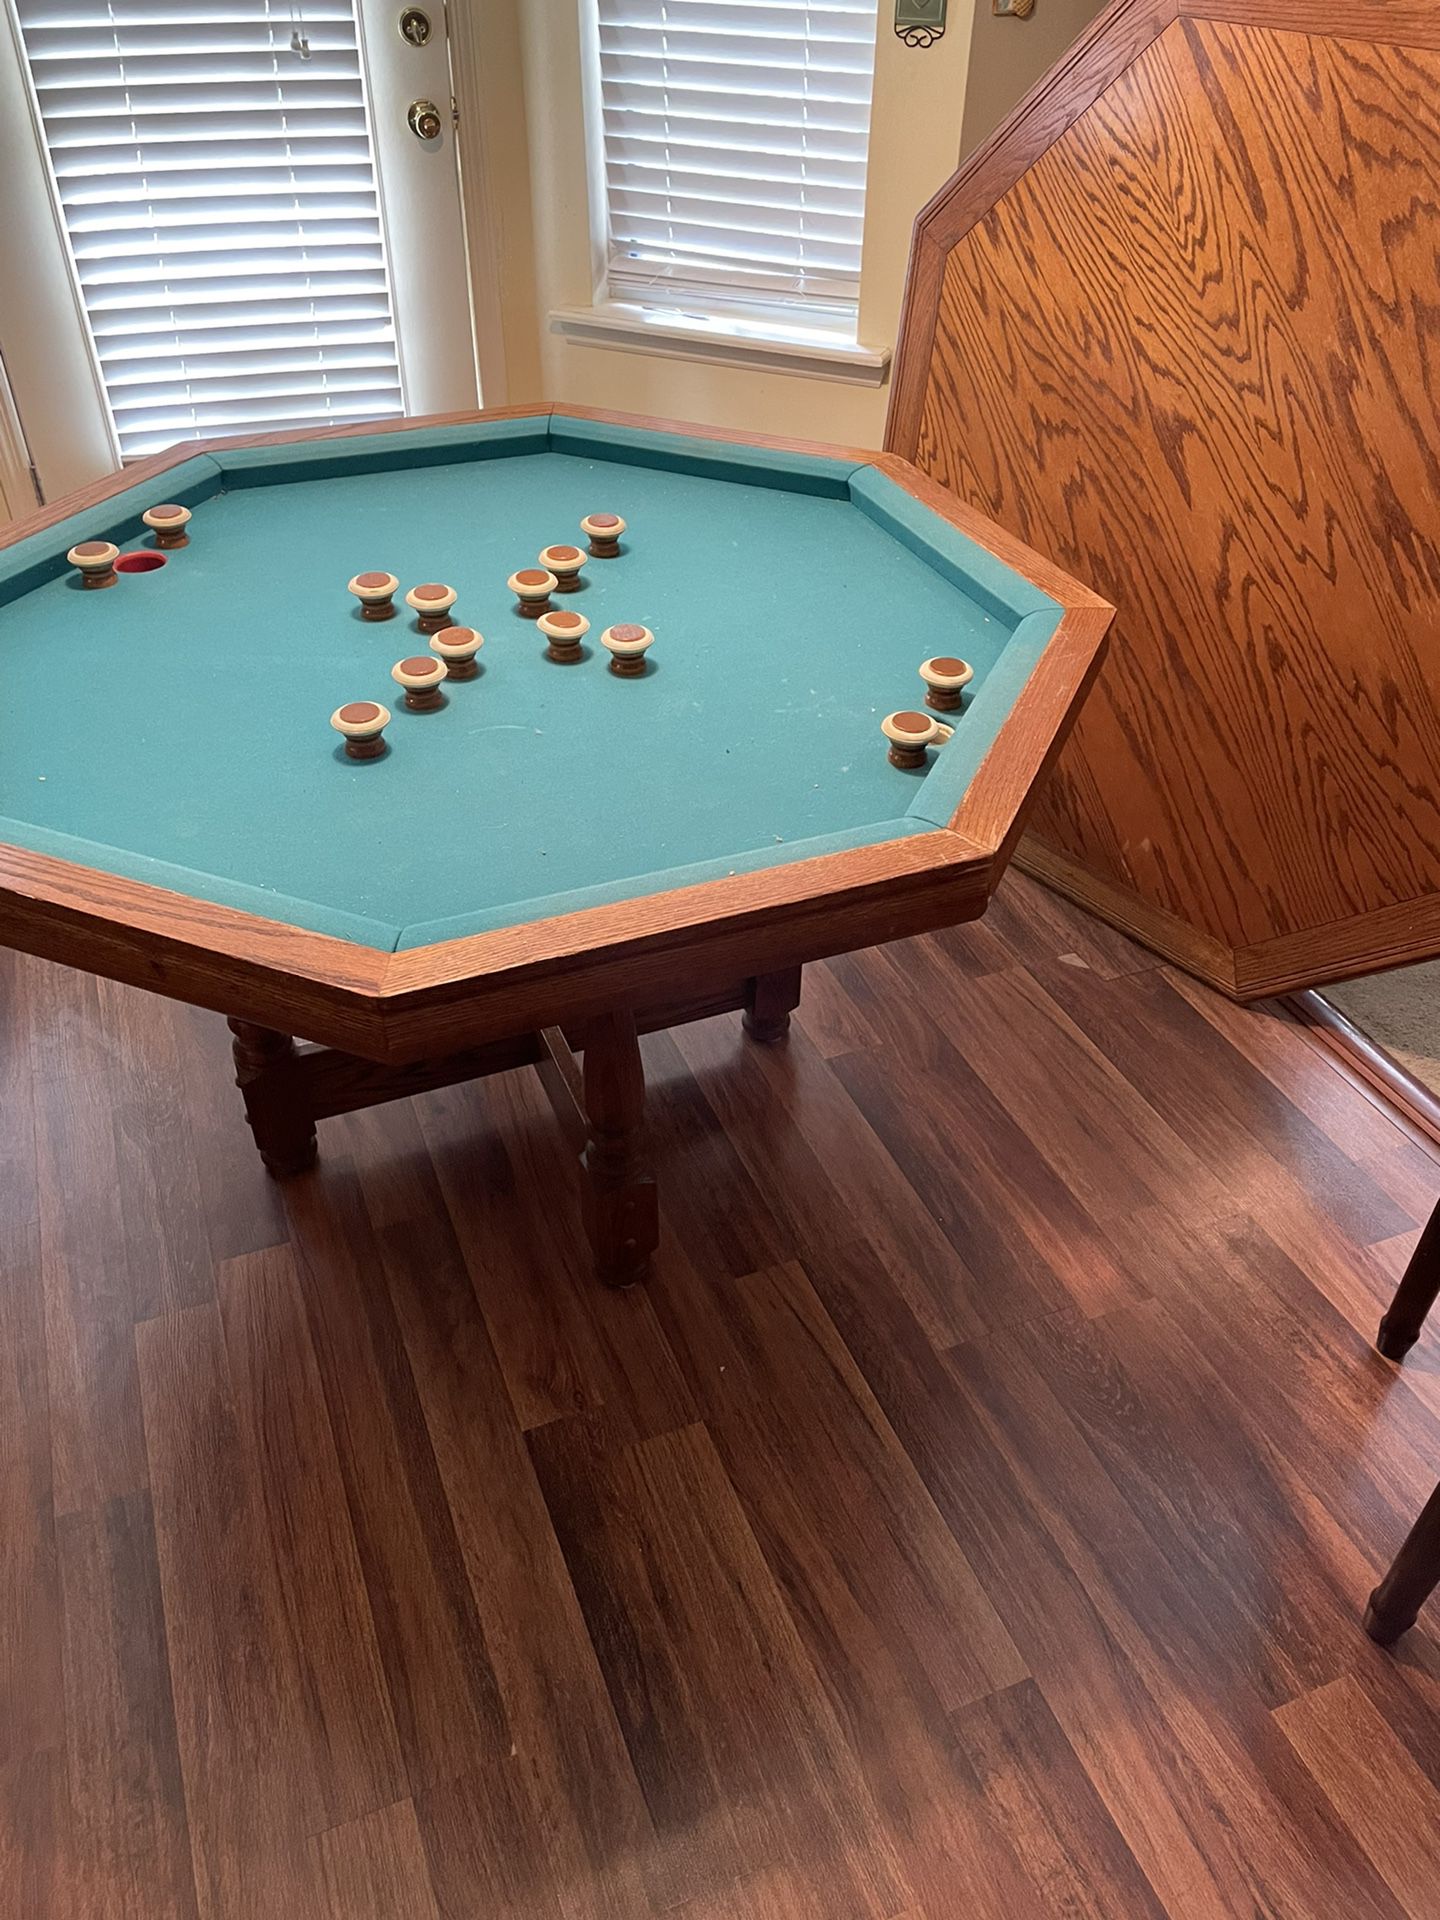 Bumper Pool/ Gambling Table(motivated Seller)down Sizing